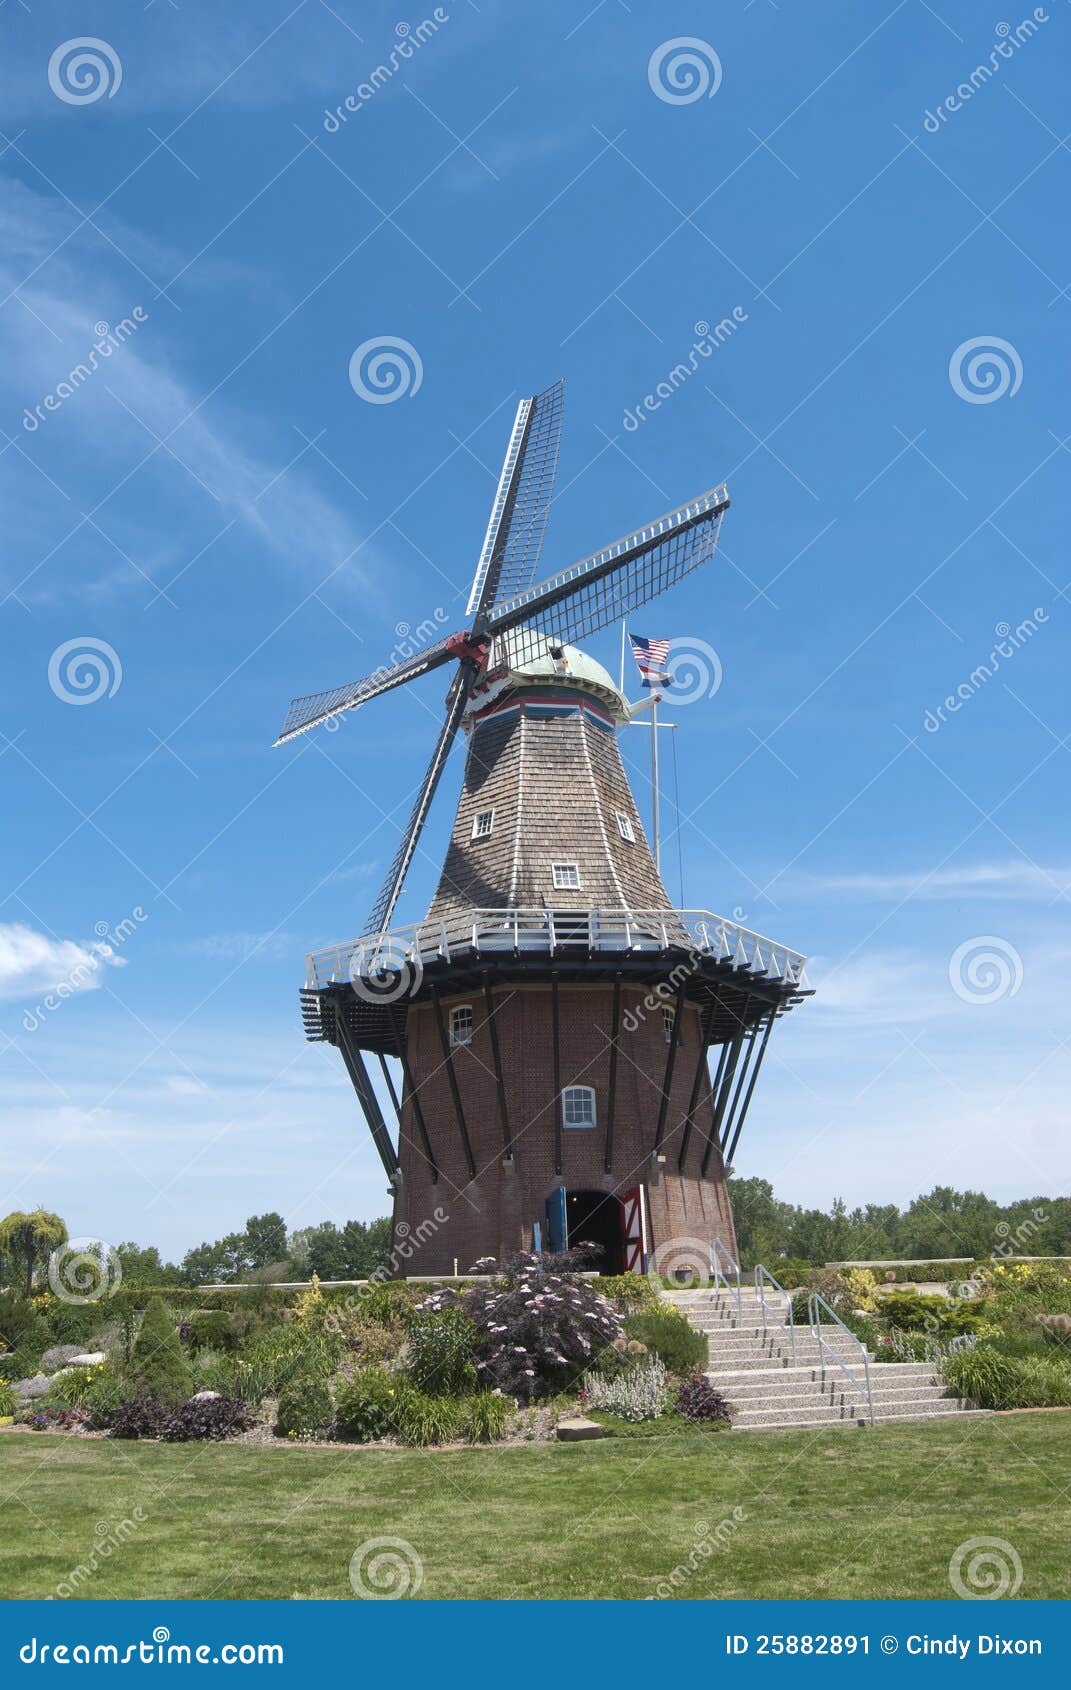 Dutch windmill moved from the Netherlands to Holland, Michigan. Oldest 